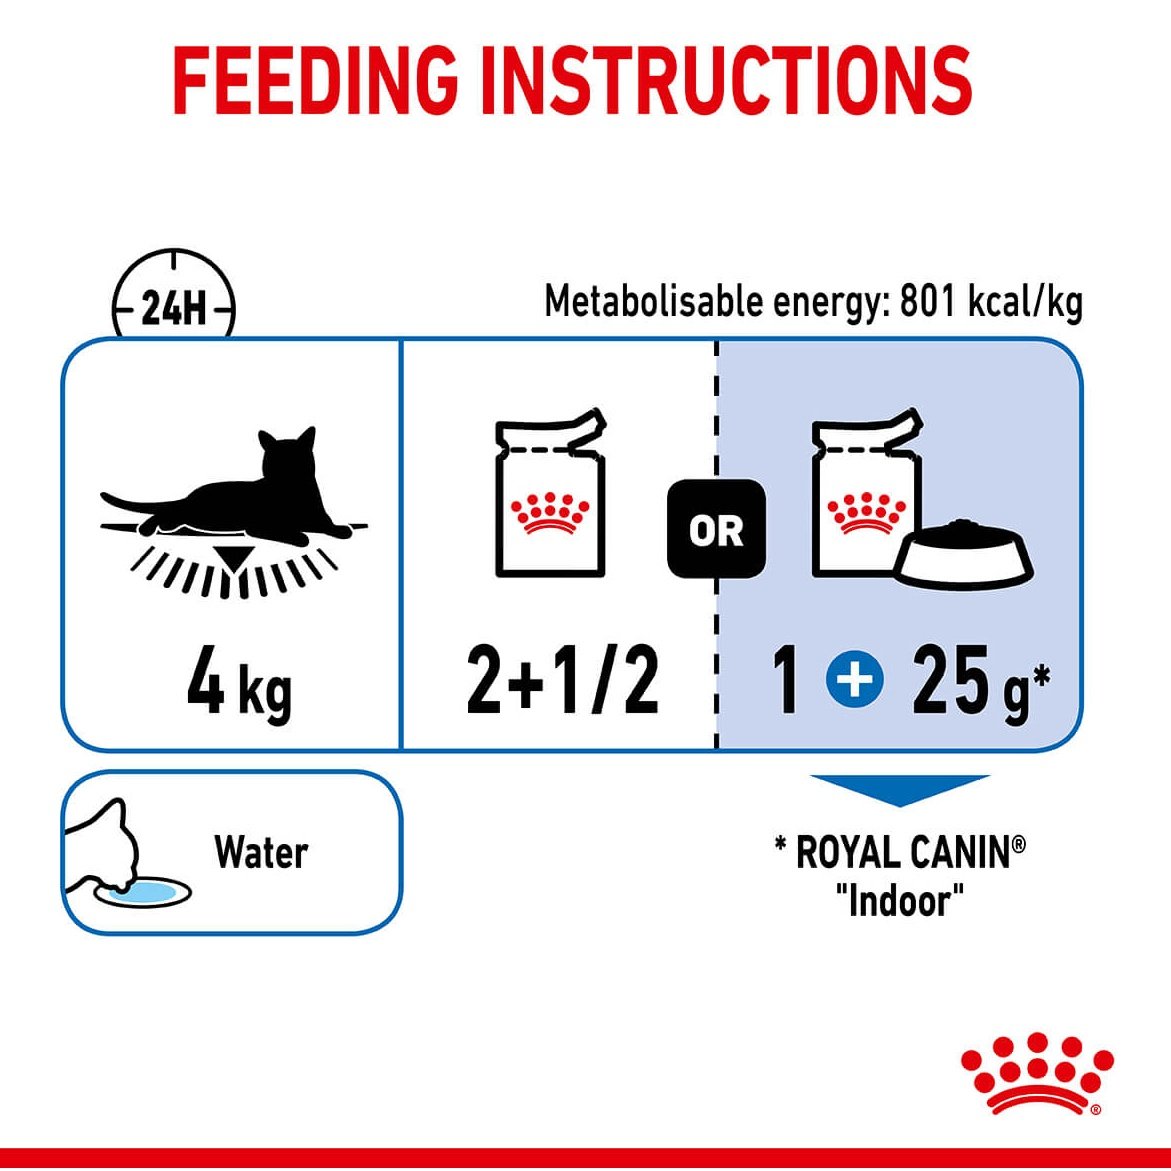 Royal Canin Indoor Jelly Wet Cat Food 85g (100000023152) [default_color]